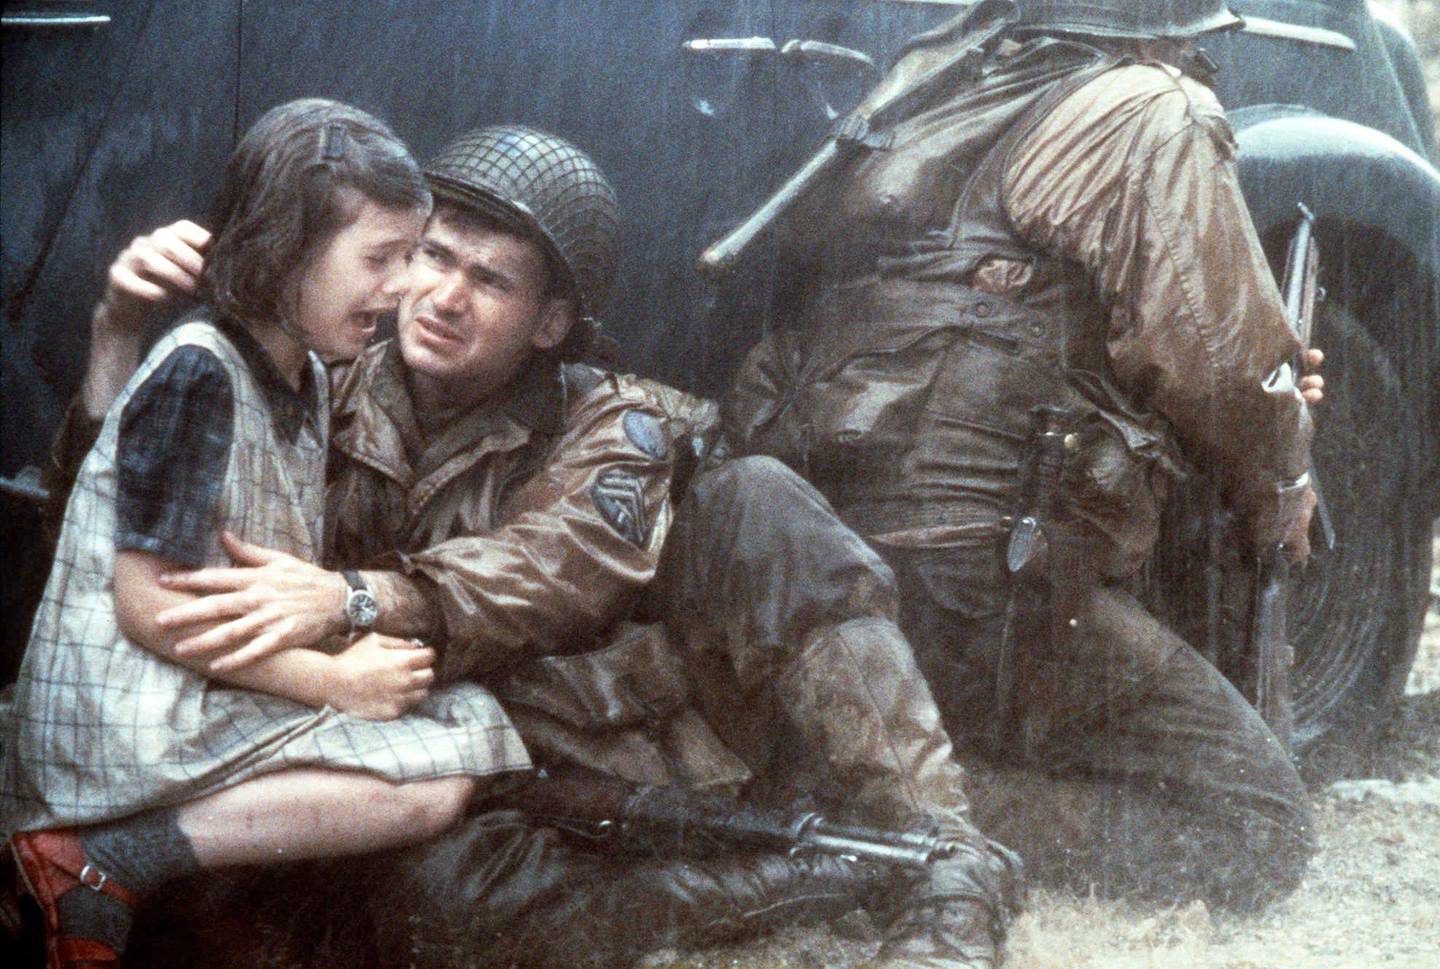 
Corporal Upham, played by Jeremy Davies, tries to comfort a terrified little girl in this 1998 publicity photo from the World War II action drama "Saving Private Ryan."   The film, directed by Steven Spielberg, deals with gritty realism and wartime violence, part of a renewed Hollywood interest in the last "good war." (AP Photo/David James, DreamWorks, HO) <%% 0 PICTURE_OK HEADER_OK 0 120 %%>